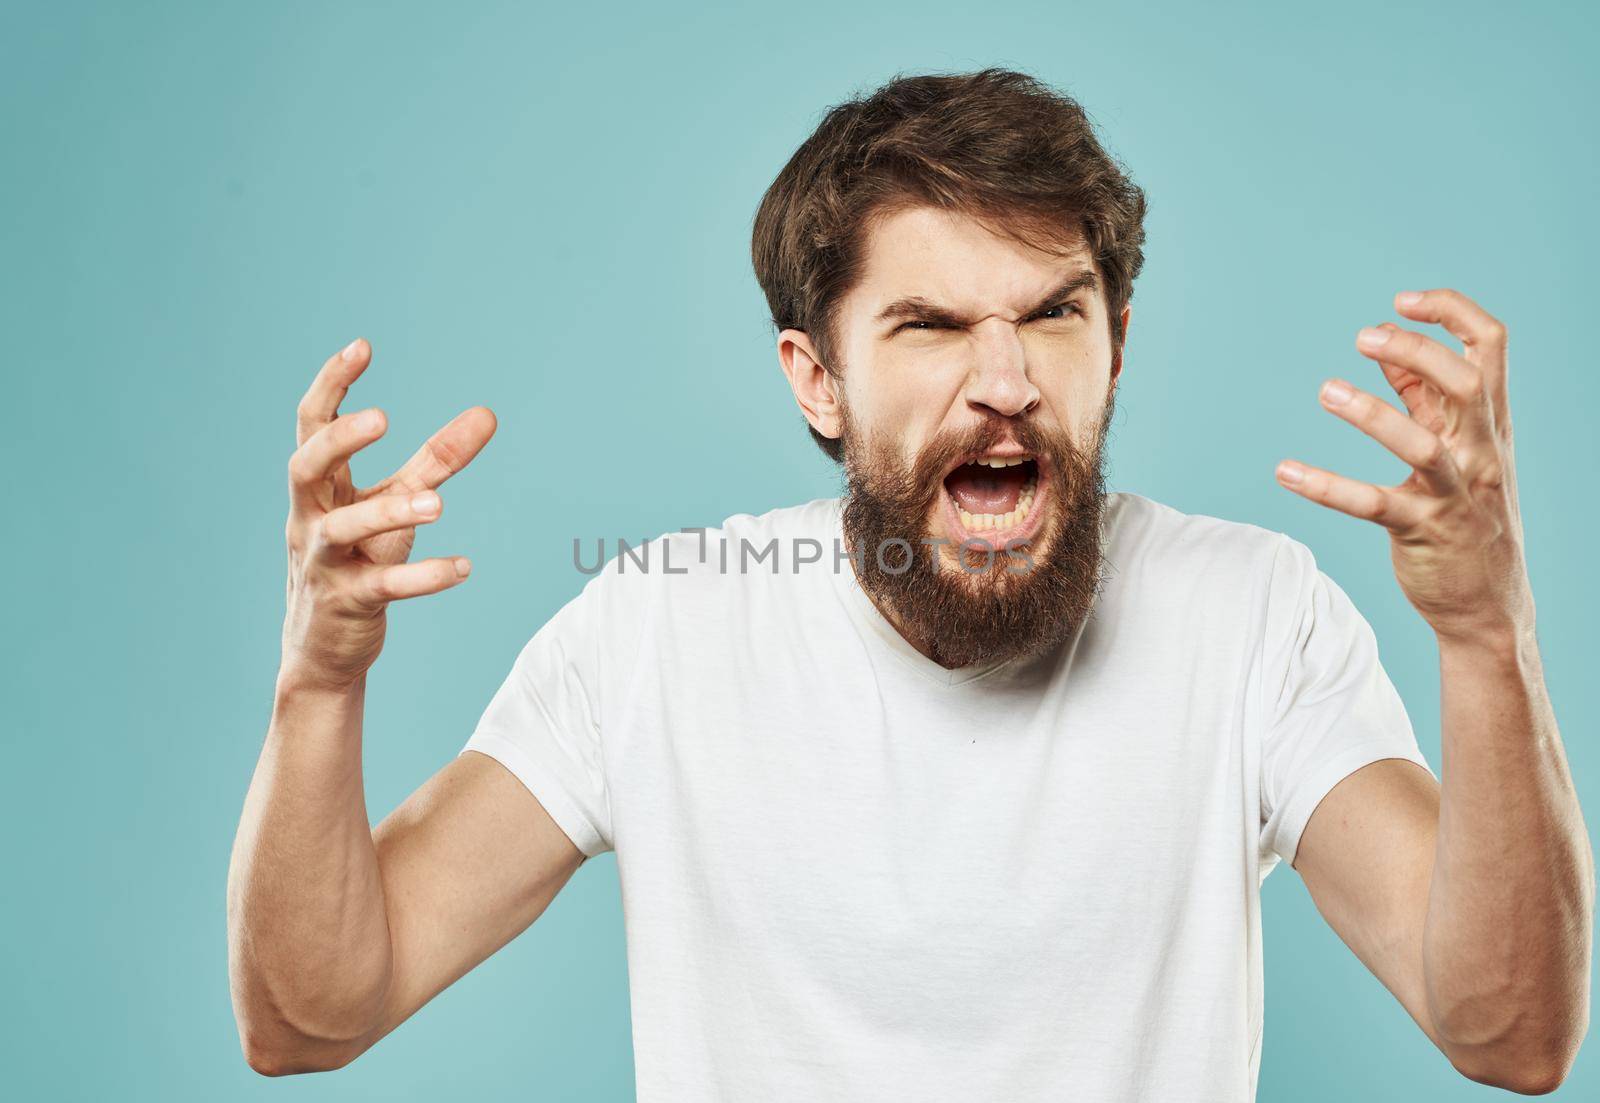 emotional man with beard on blue background gesturing with hands cropped view Copy Space by SHOTPRIME